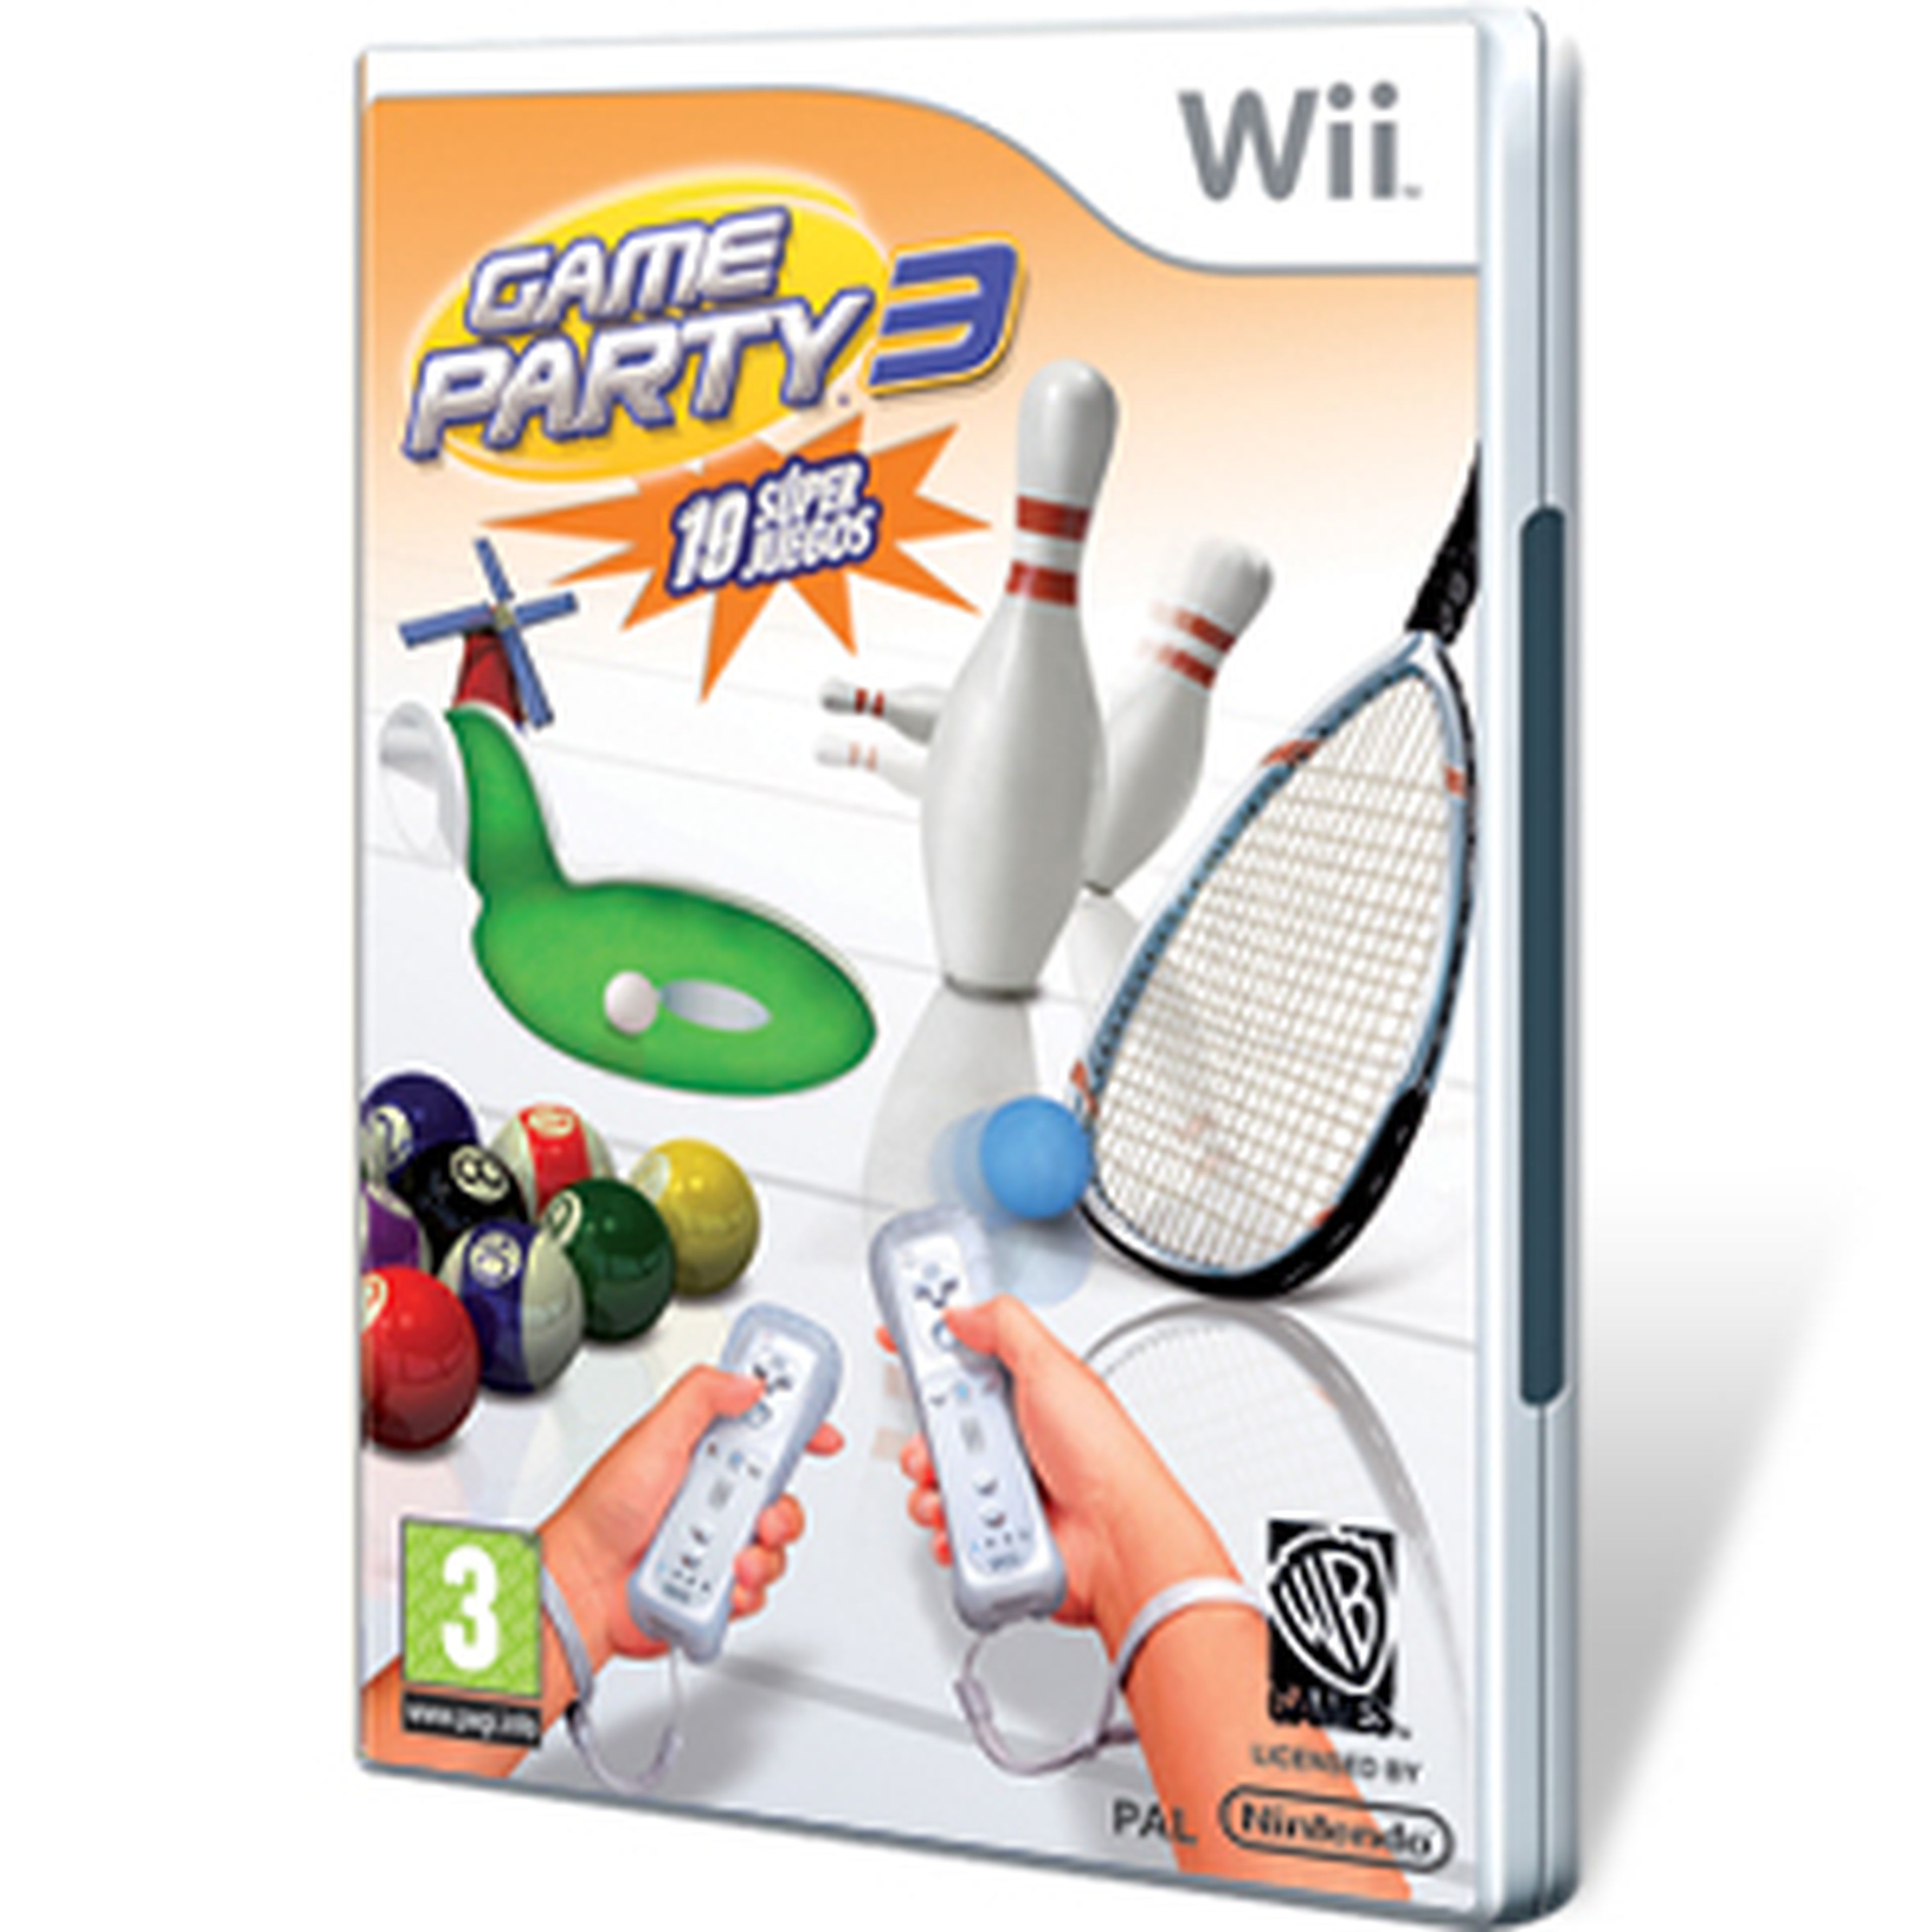 Game Party 3 para Wii